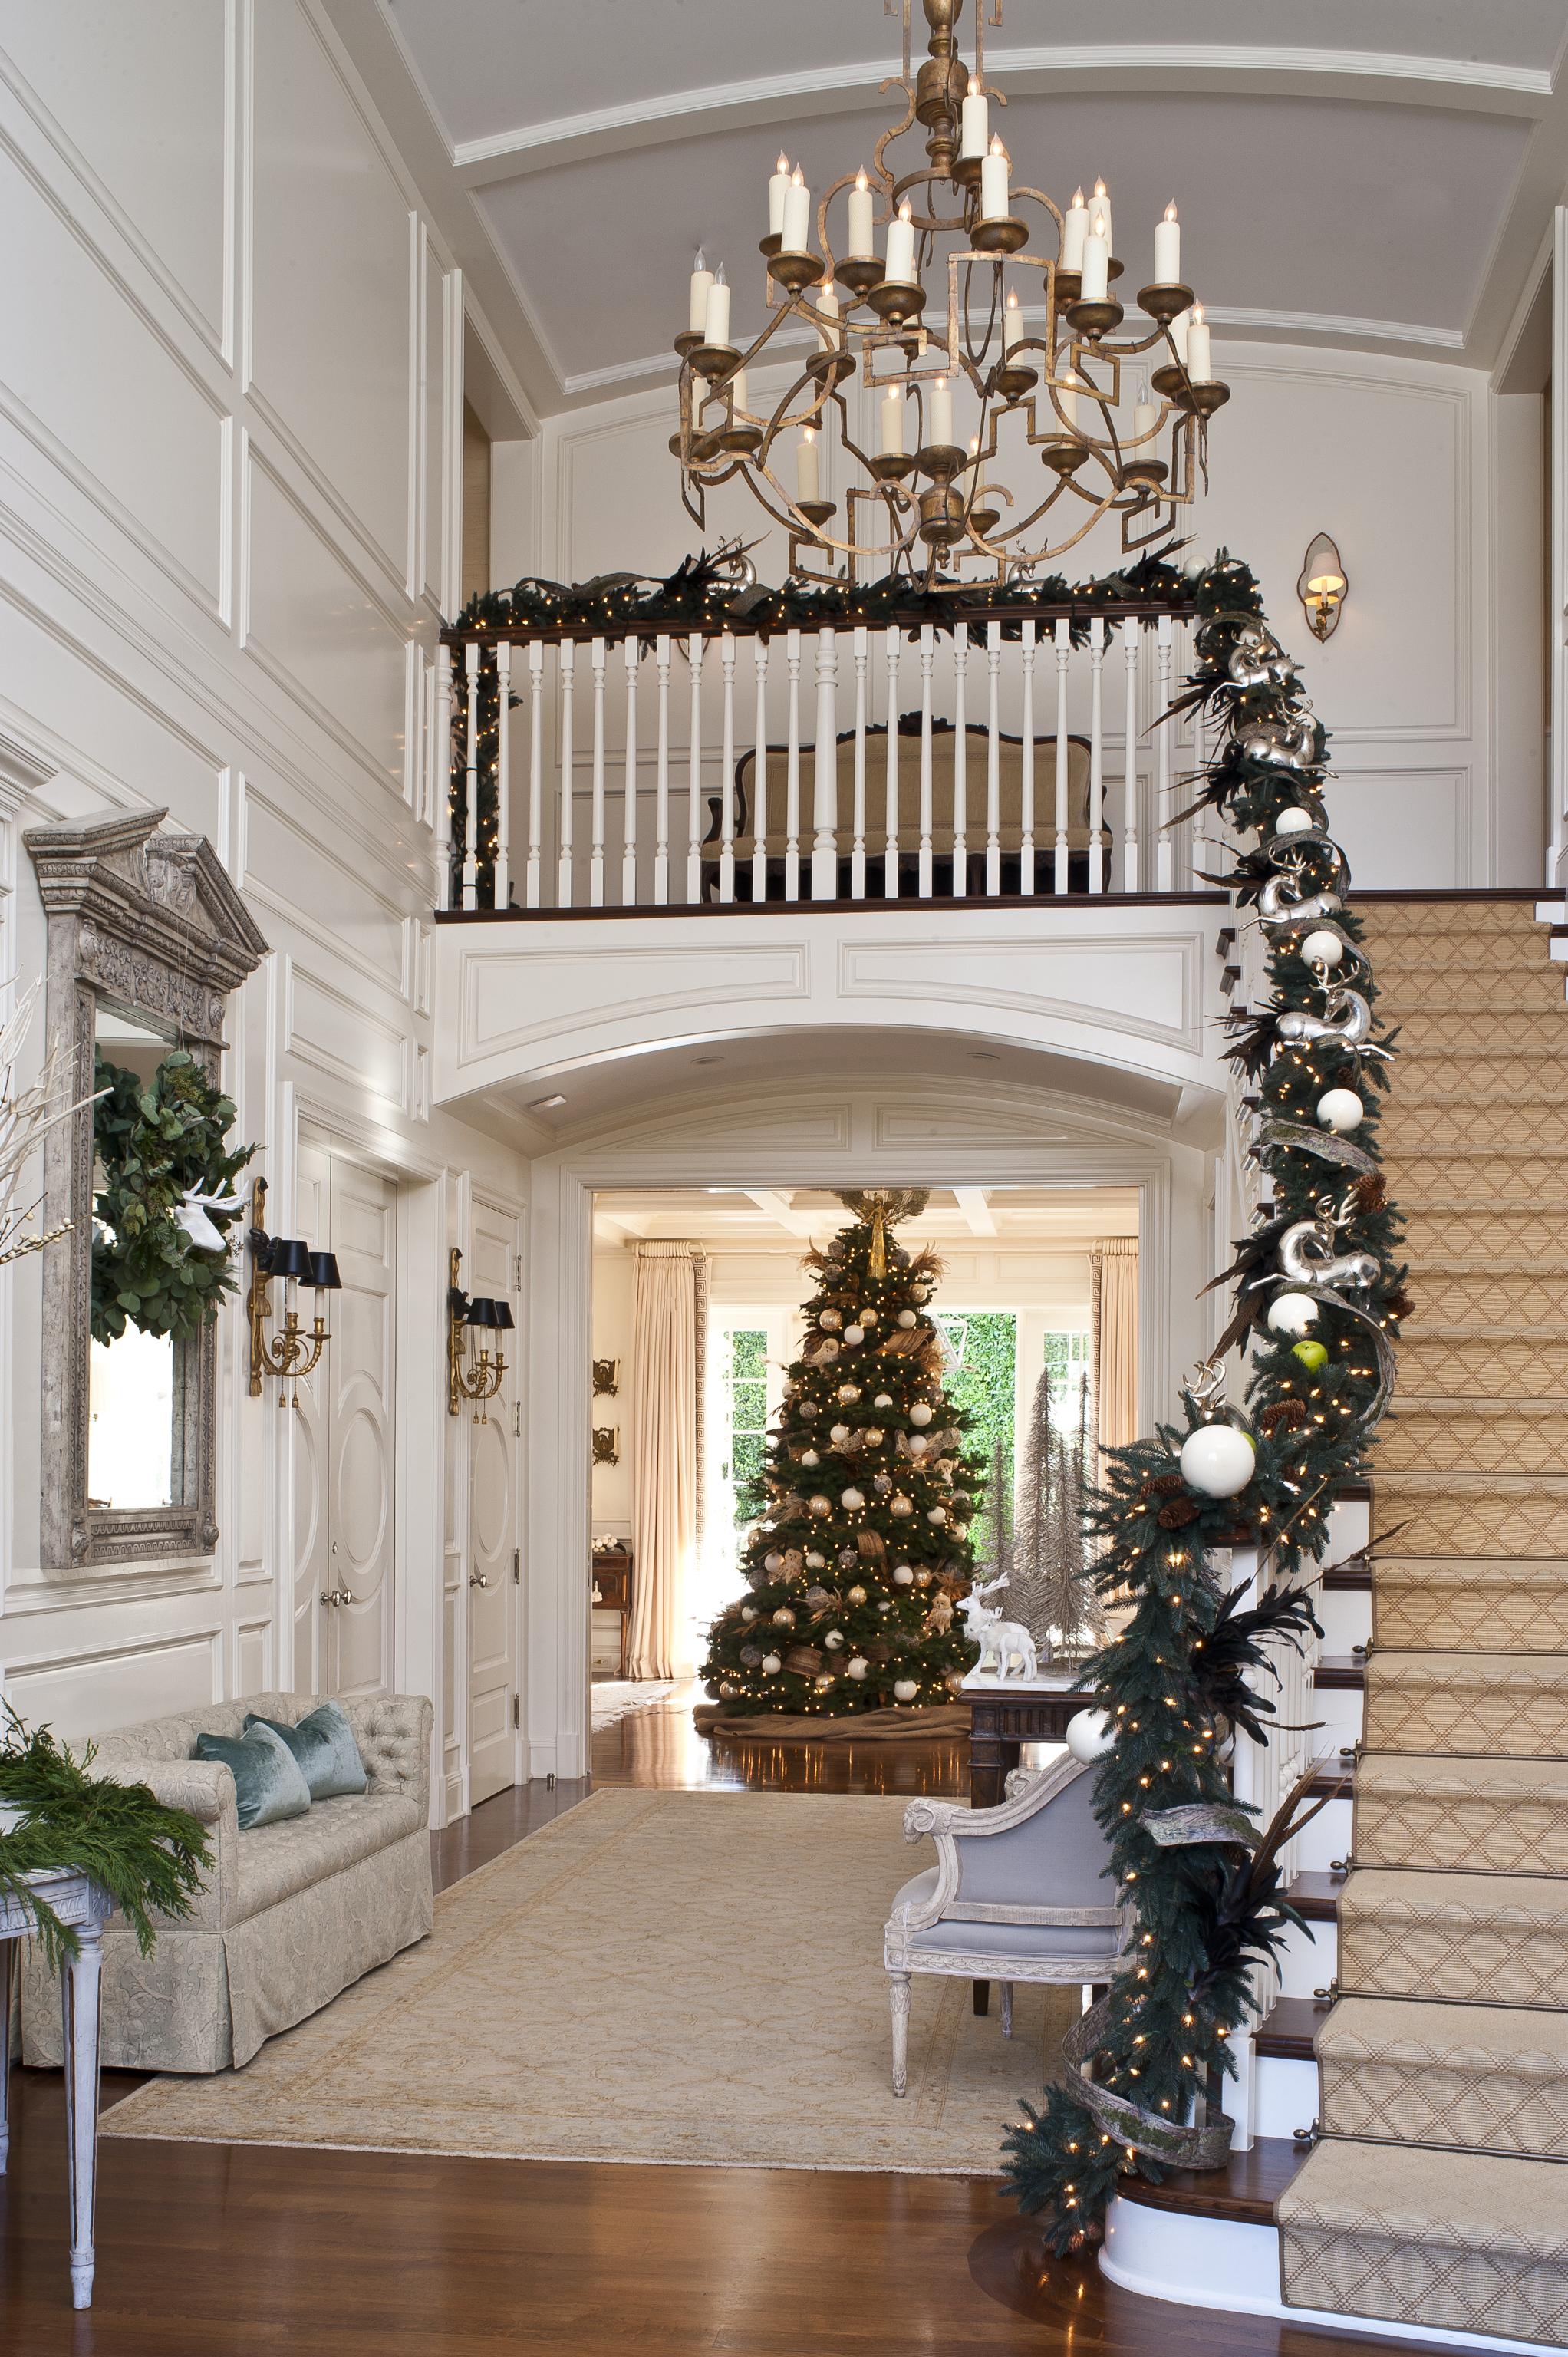 Top Christmas Staircase Decorations Celebration about Christmas